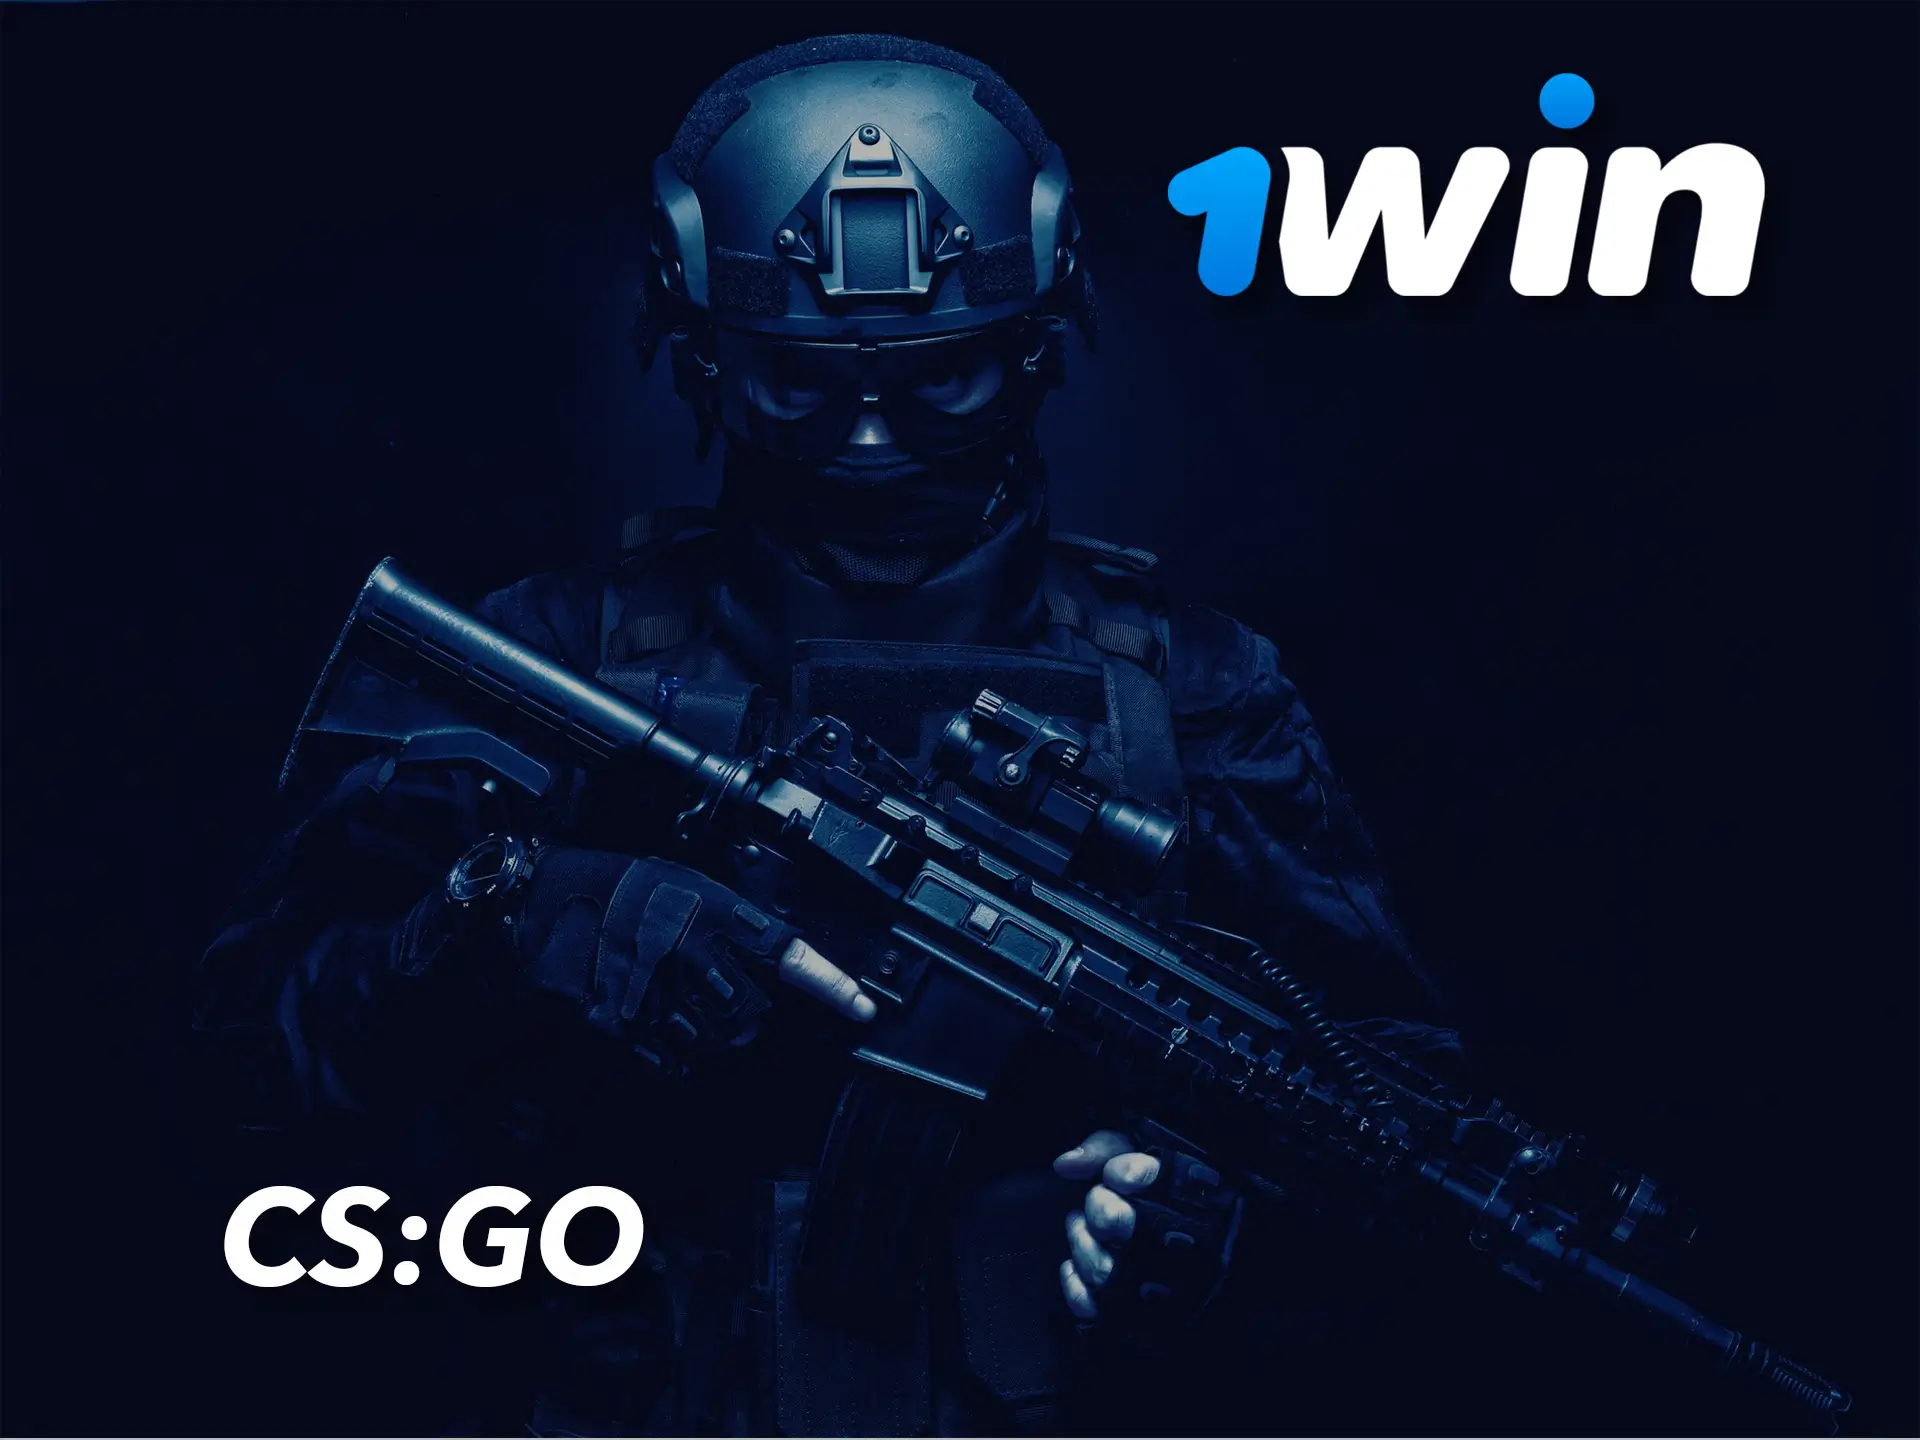 Shooter fans can try their hand at betting on cs:go at 1Win.